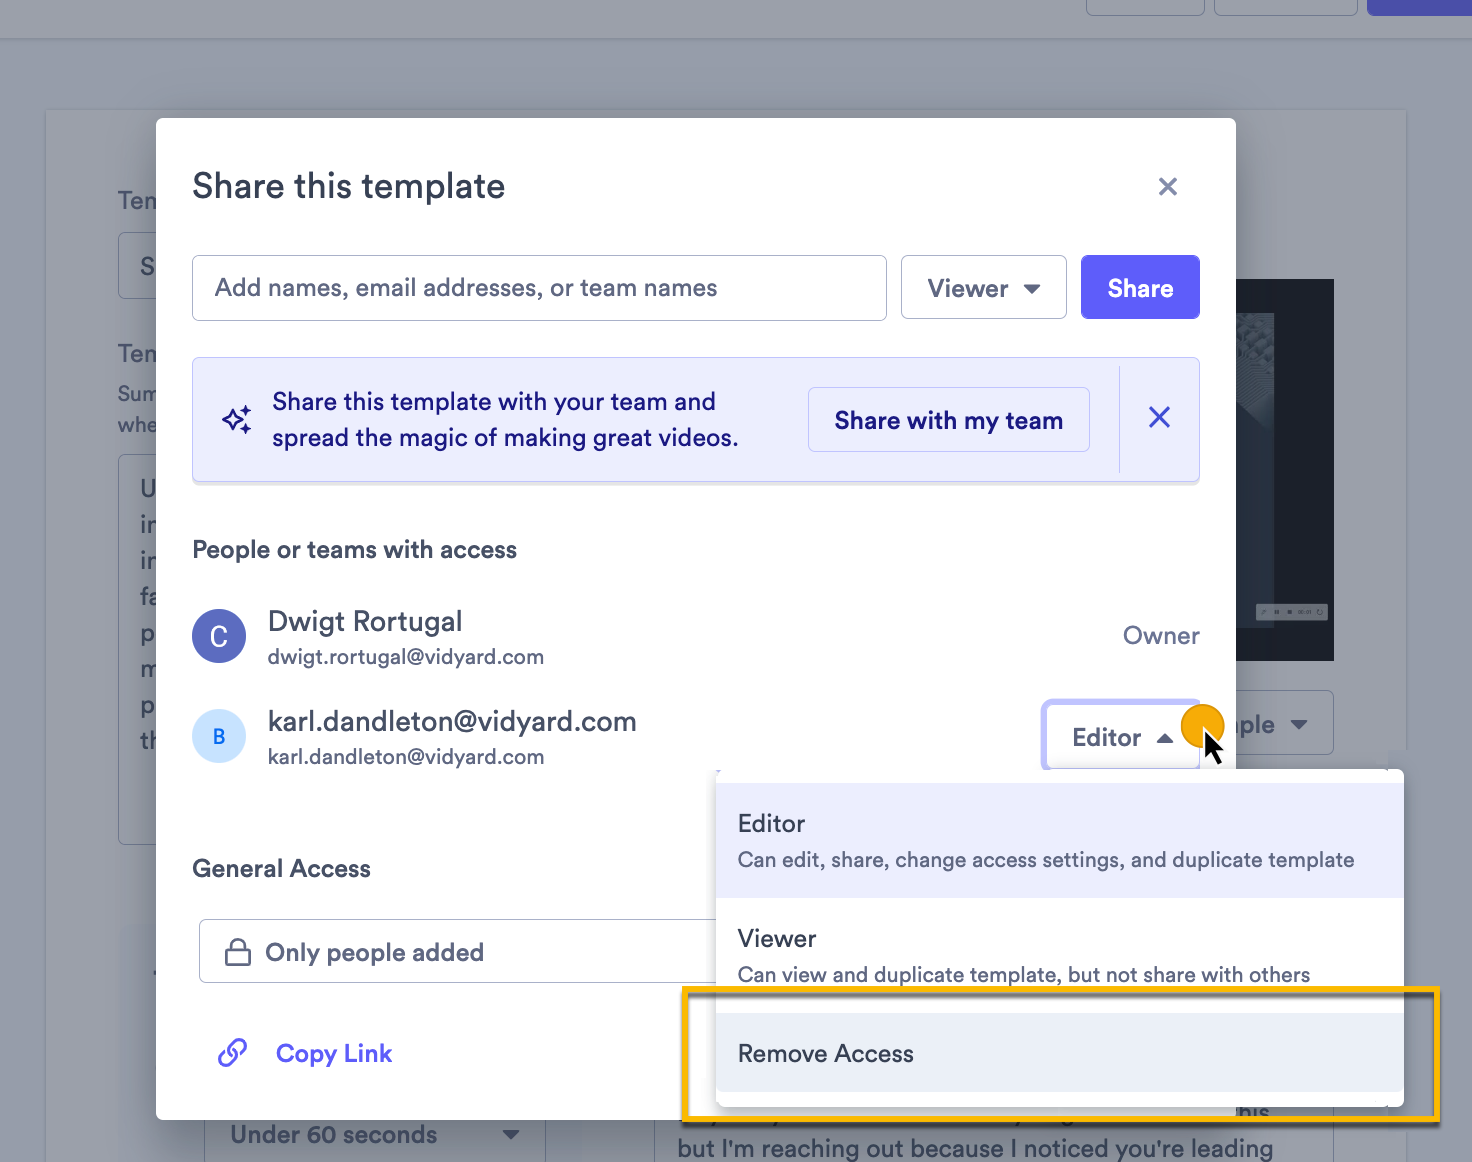 User's access being removed from the role dropdown in a template's share modal